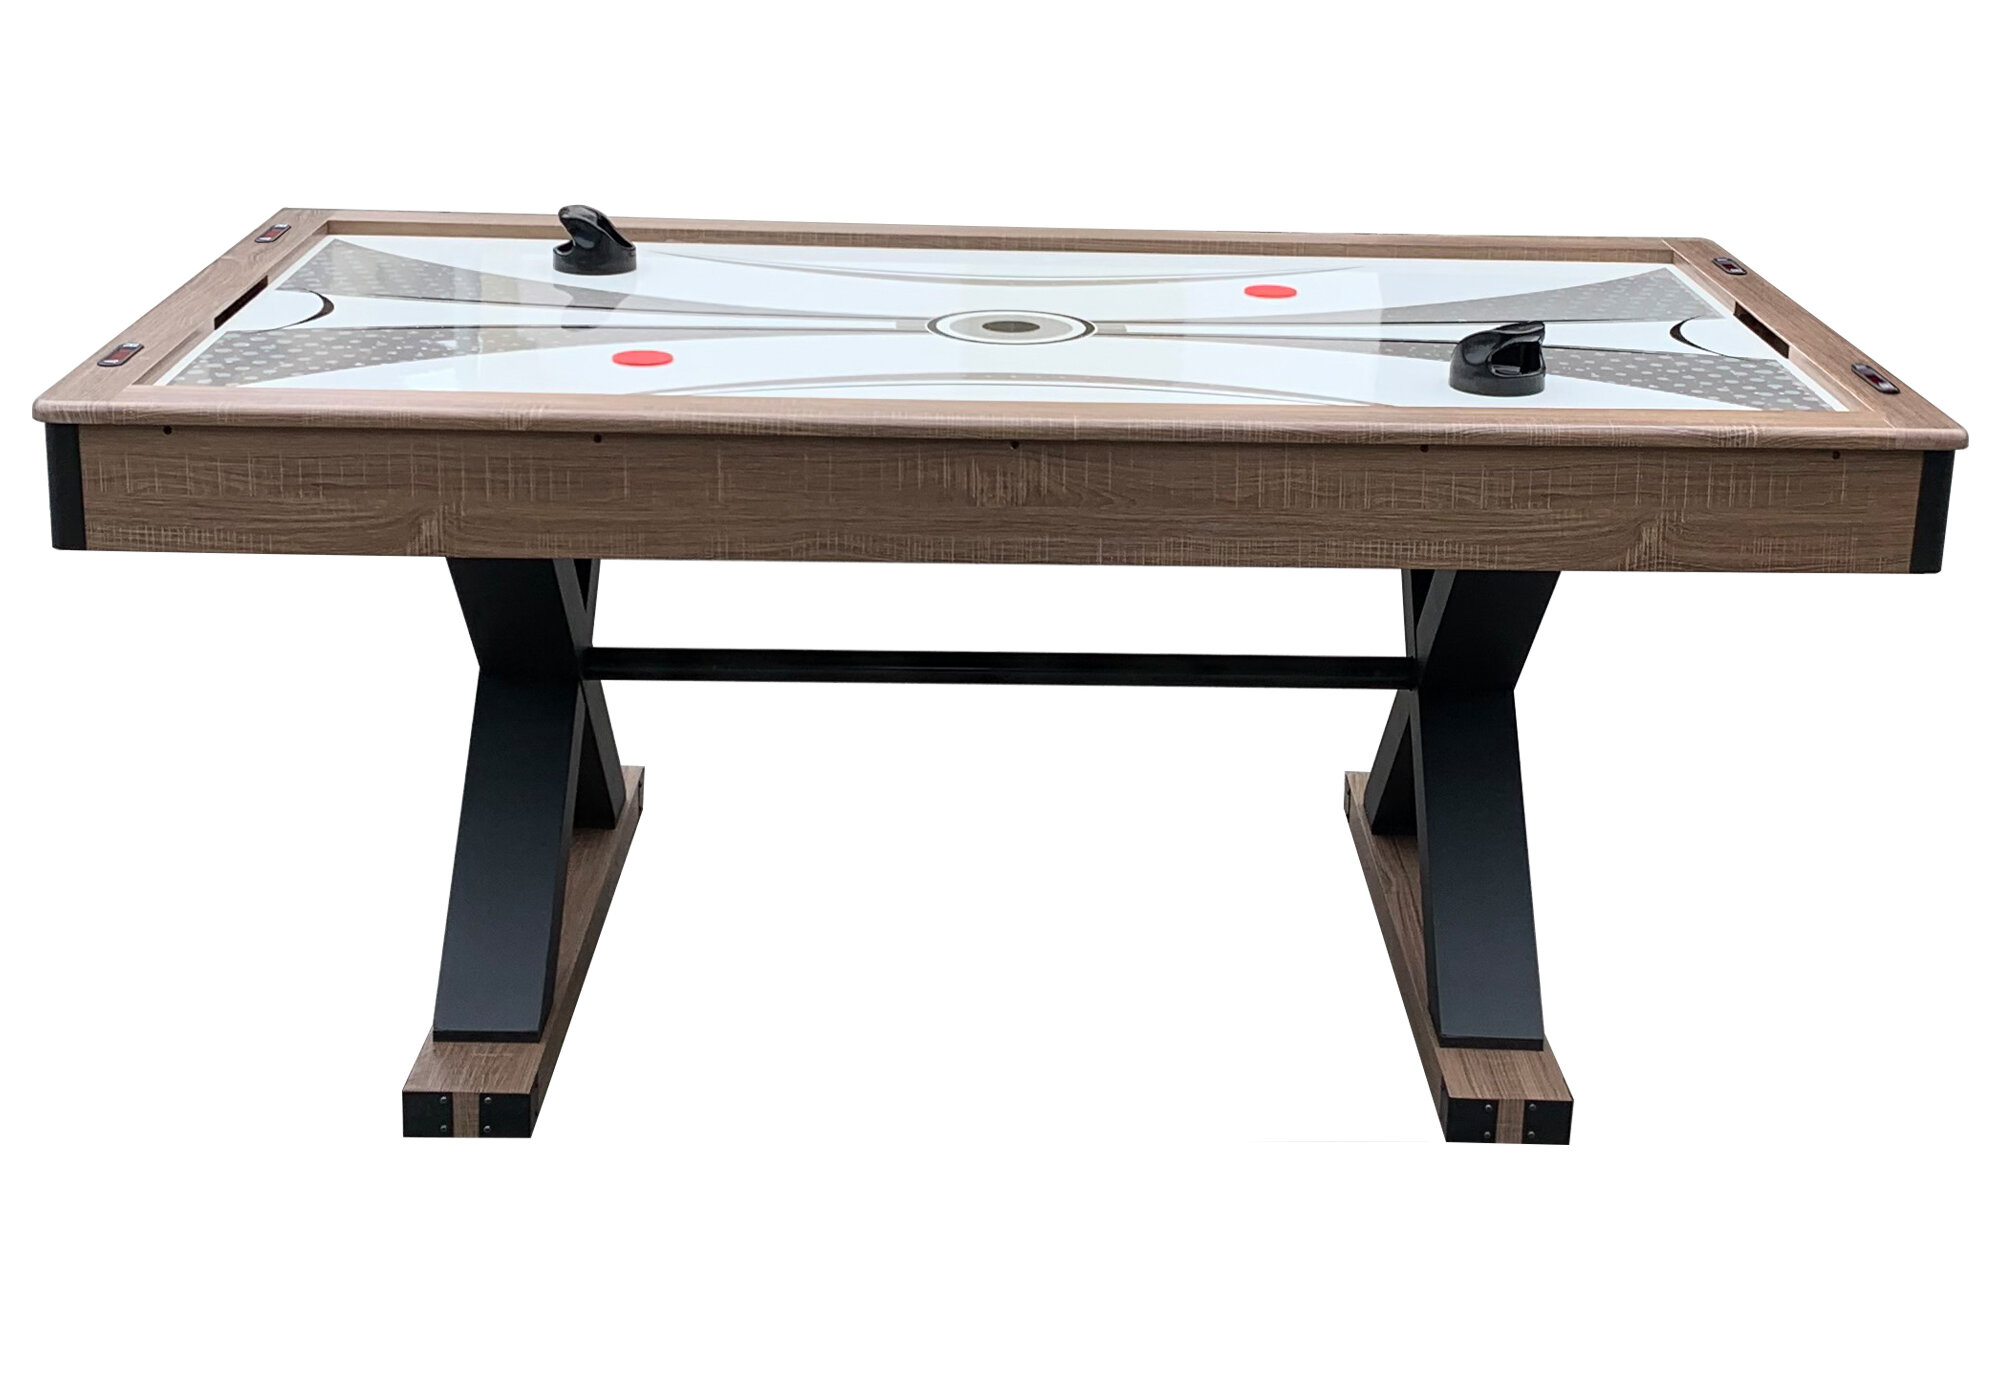 2 player air hockey games online free